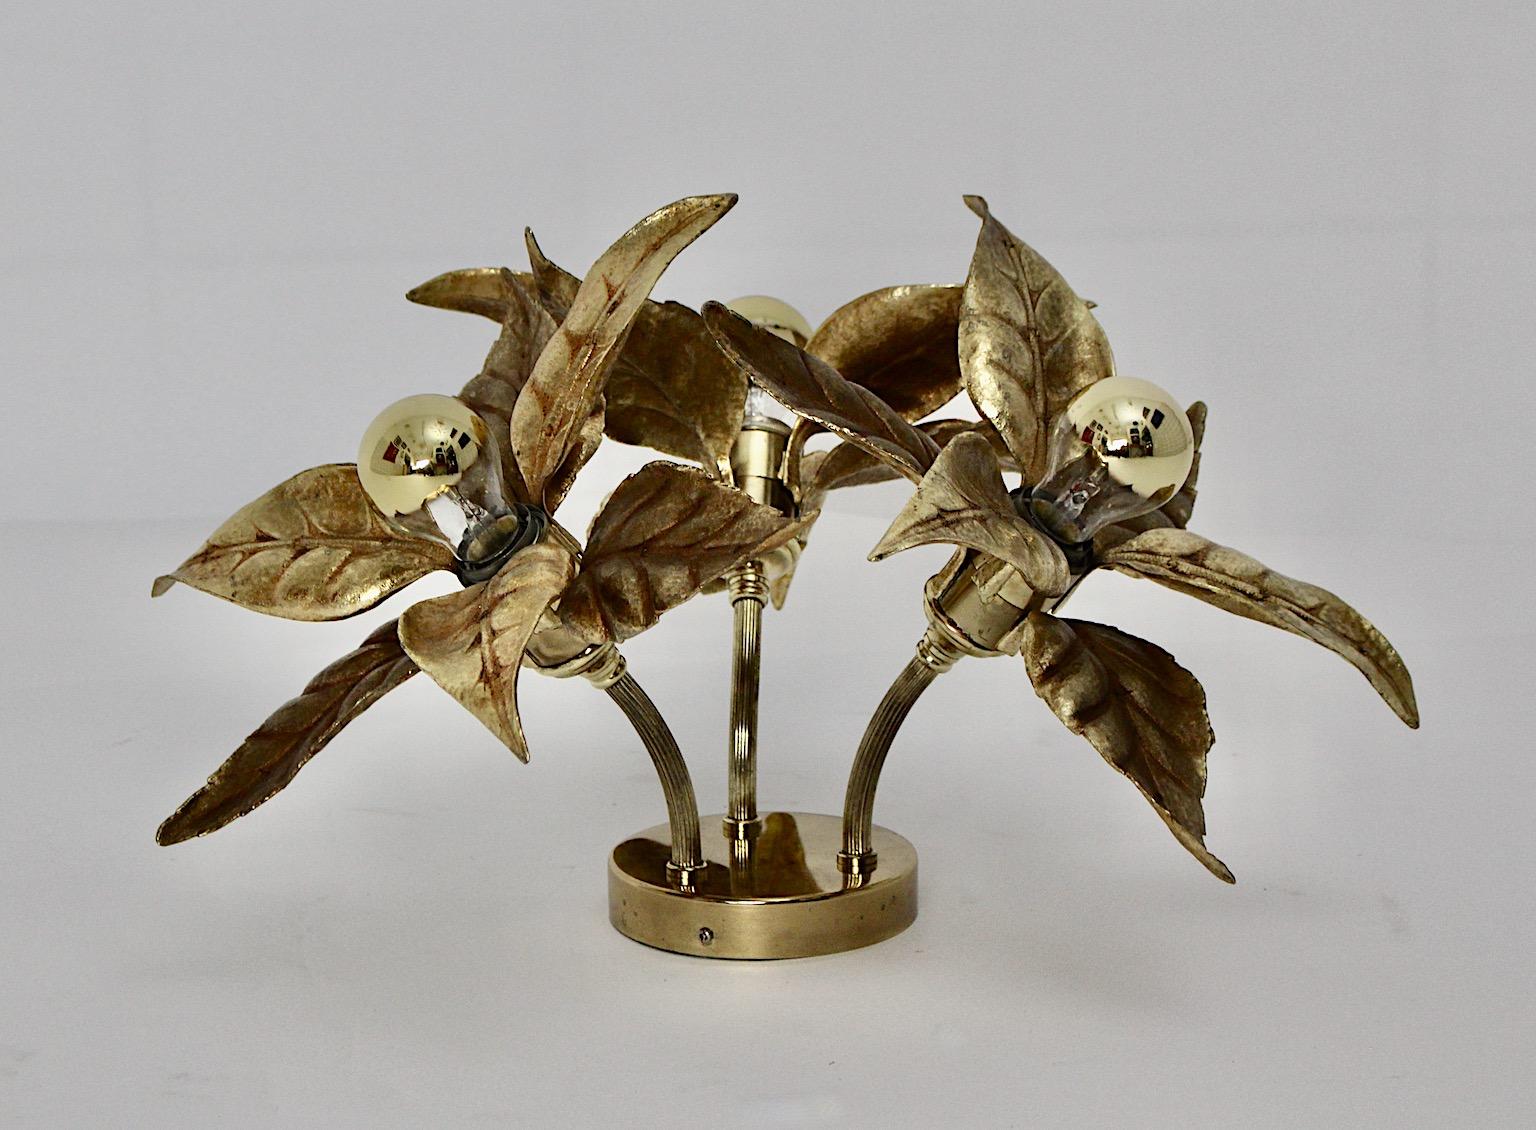 Hollywood Regency style vintage floral sconce or flush mount or table lamp from golden metal flower like by Willy Daro 1970s.
Stunning vintage sconce or flush mount or table lamp with three gilt flower heads like fixed on a golden plate by Willy